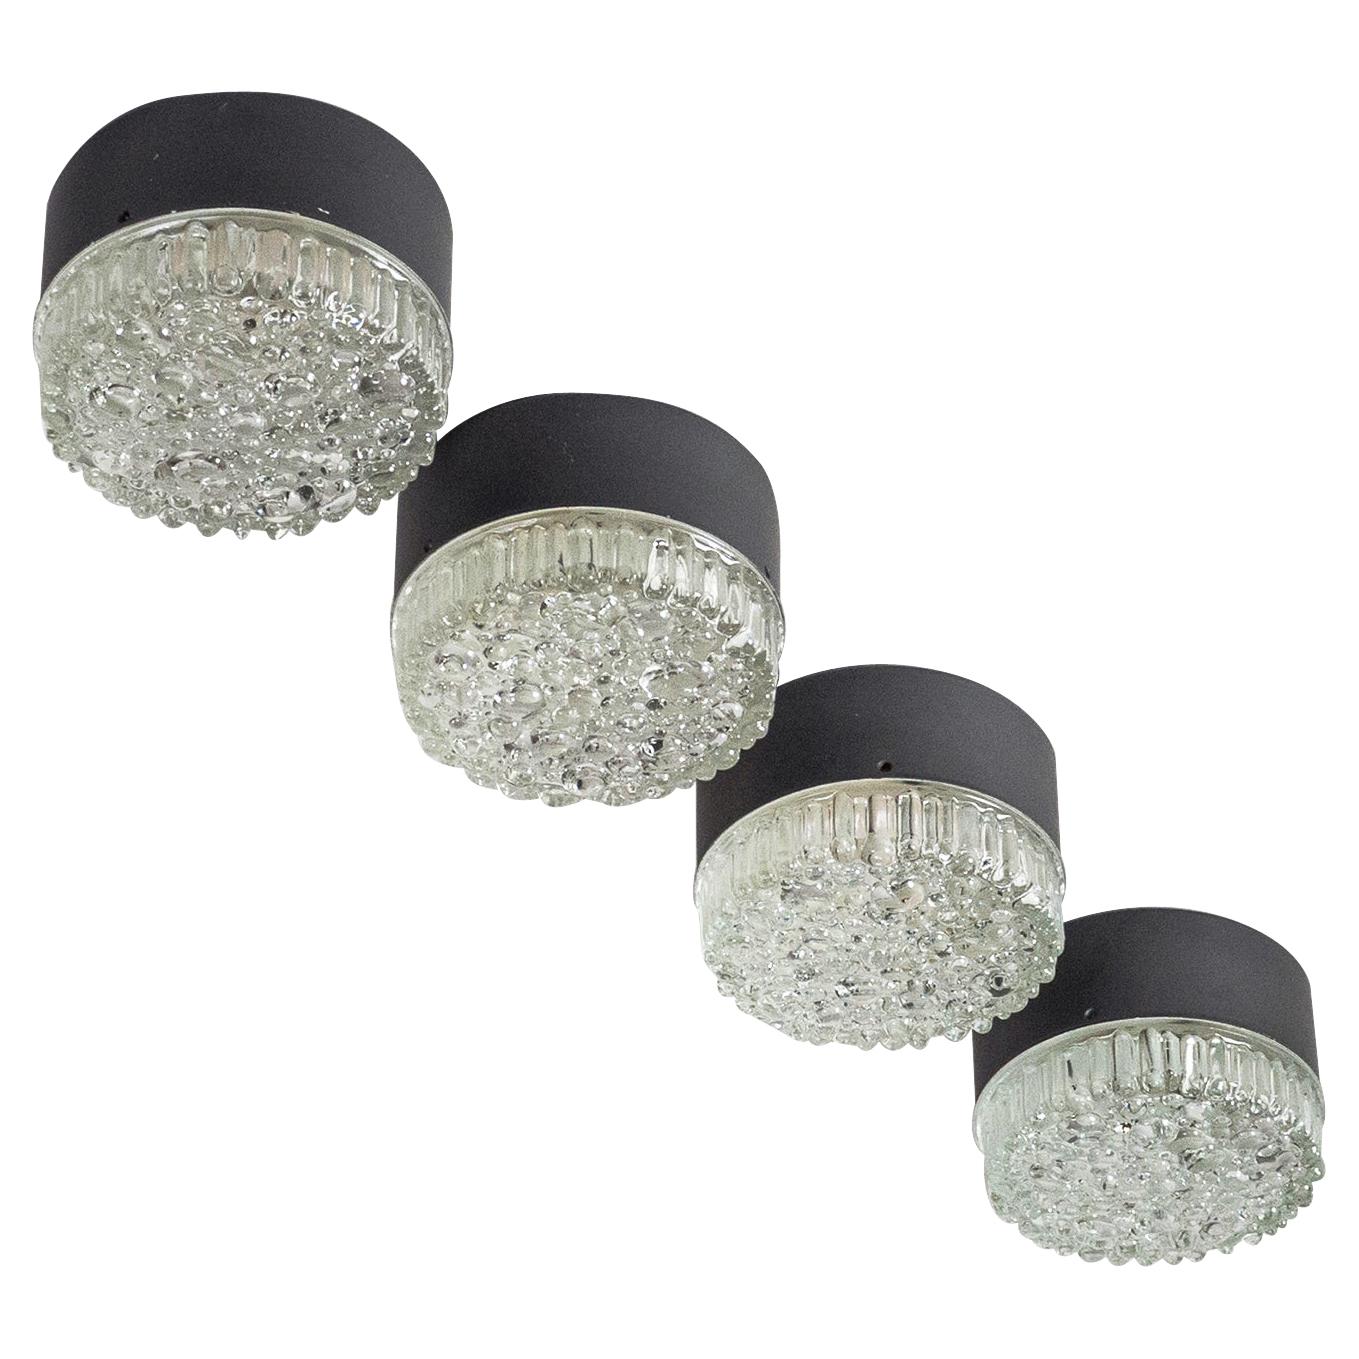 Four Wall or Ceiling Lights, 1960s, Bubble Glass